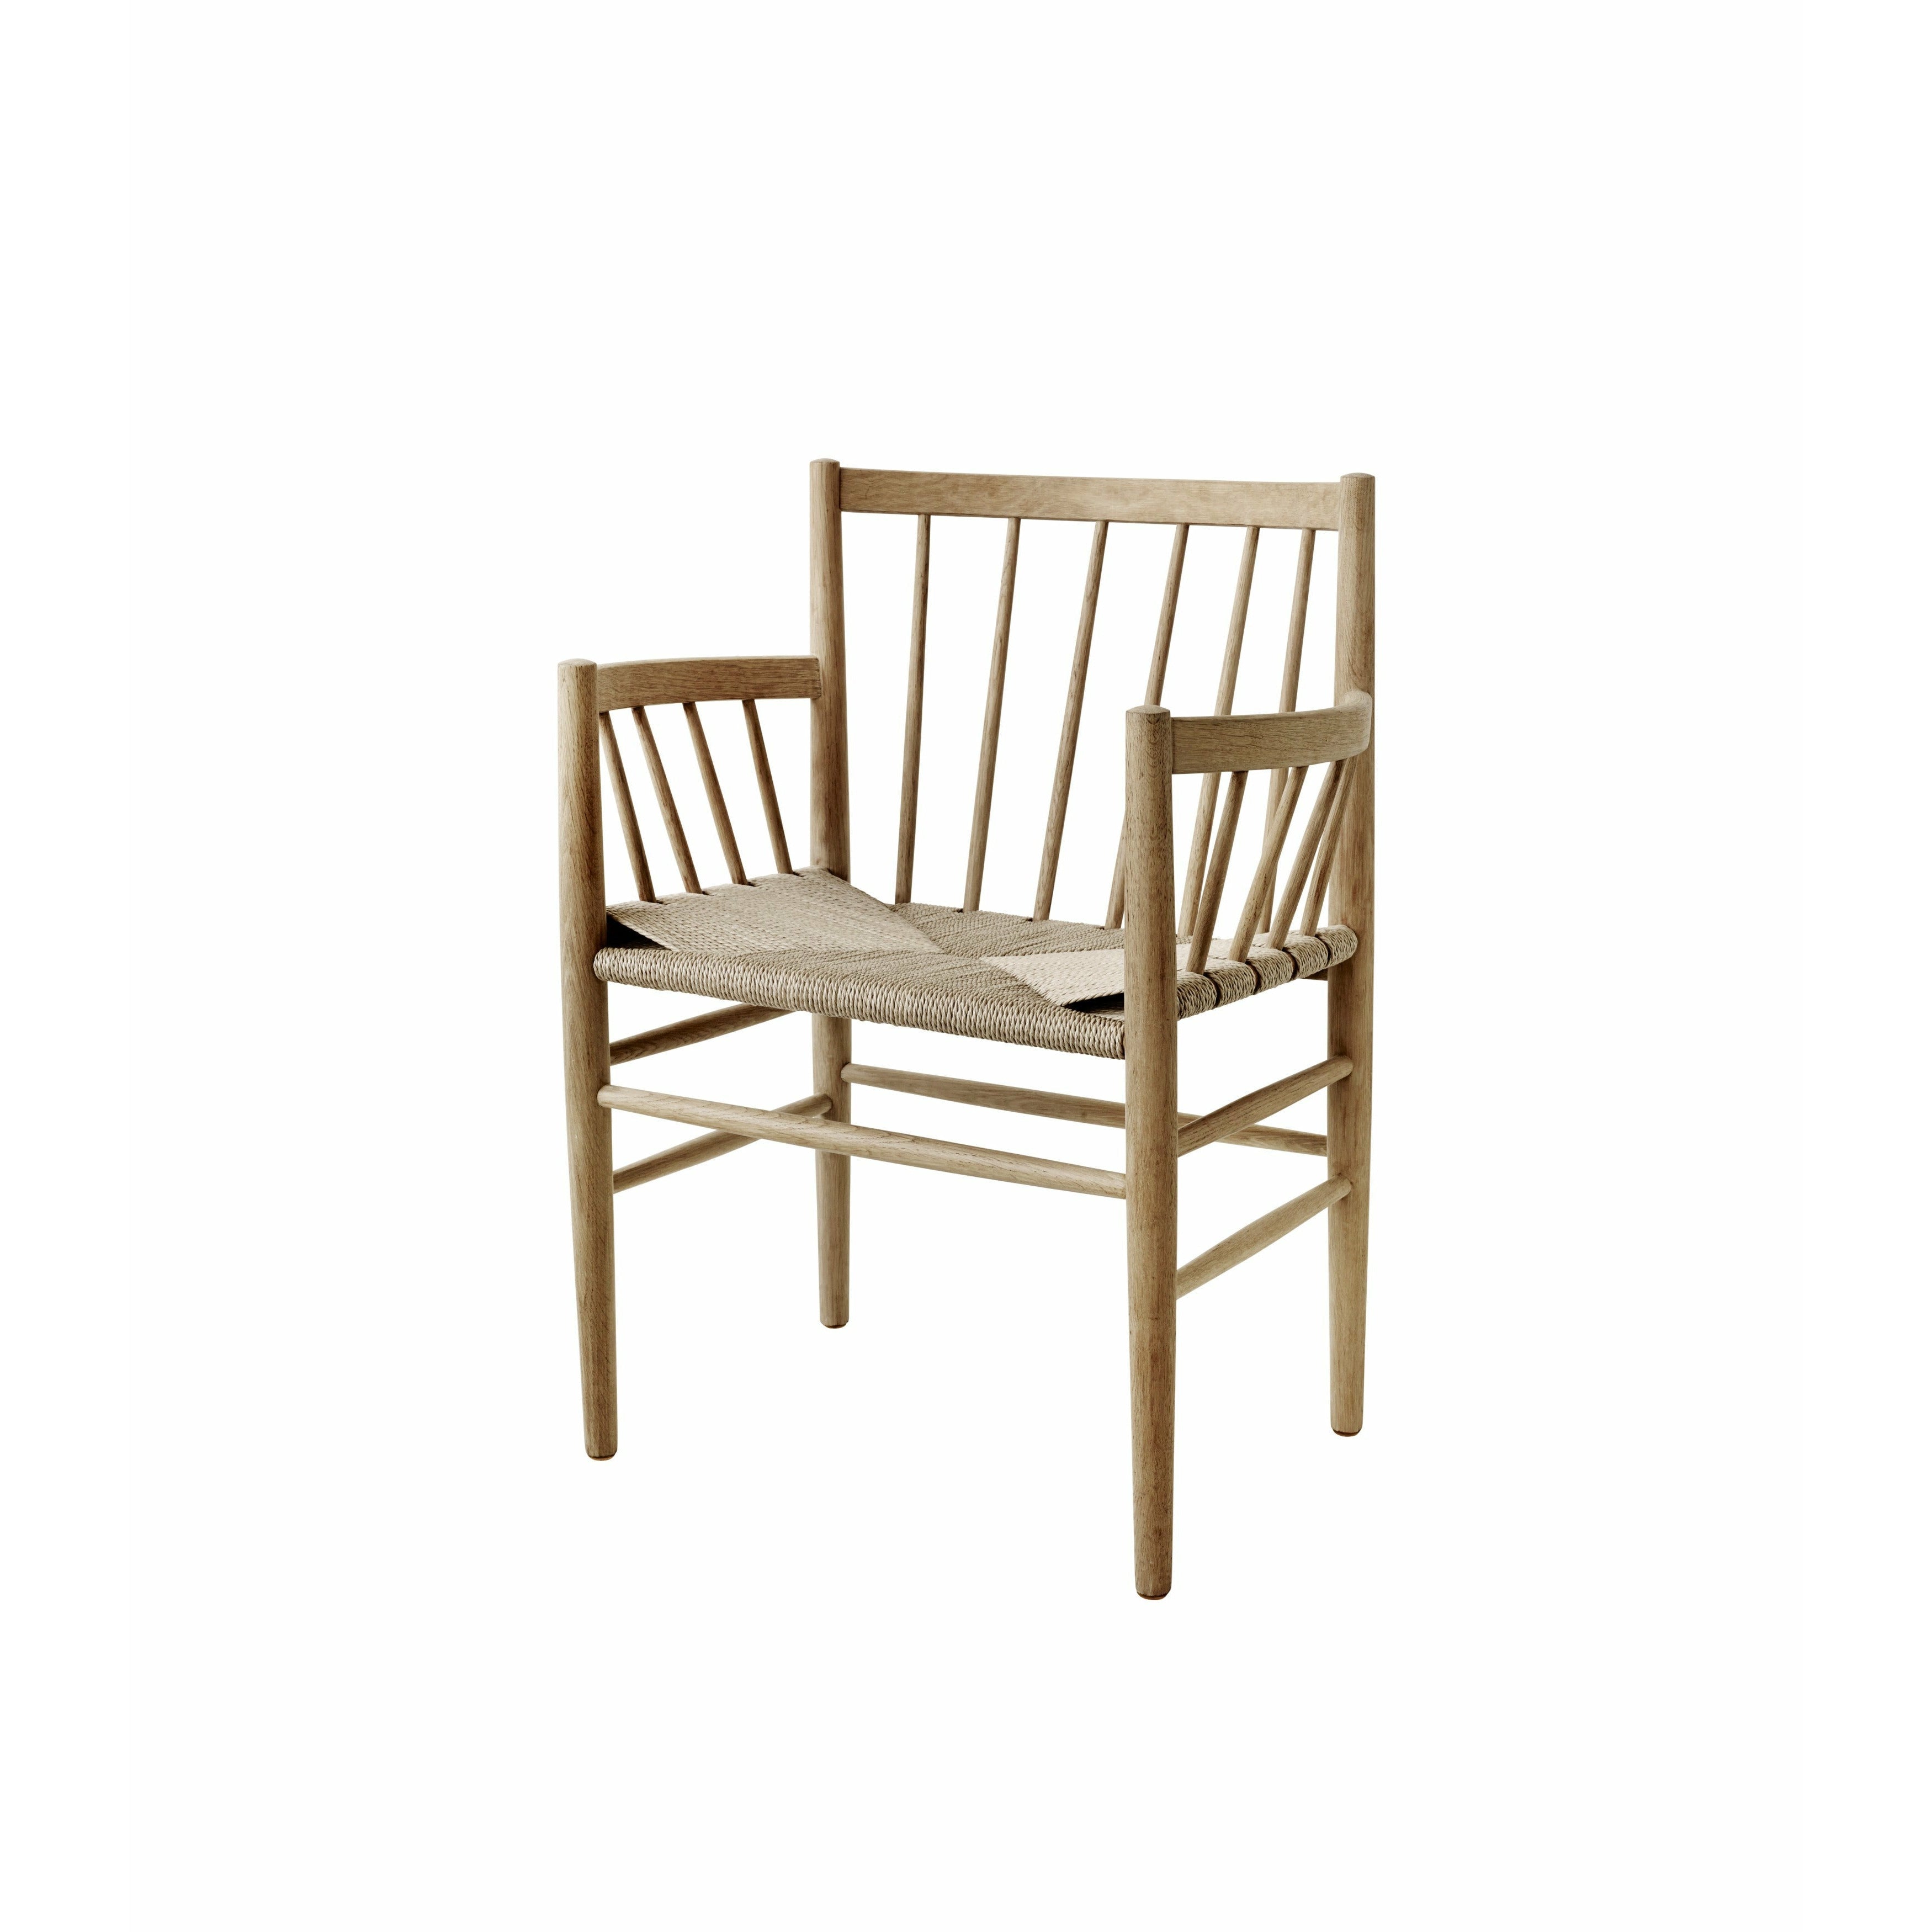 Fdb Møbler J81 Dining Chair With Armrest, Oiled Oak, Natural Wicker